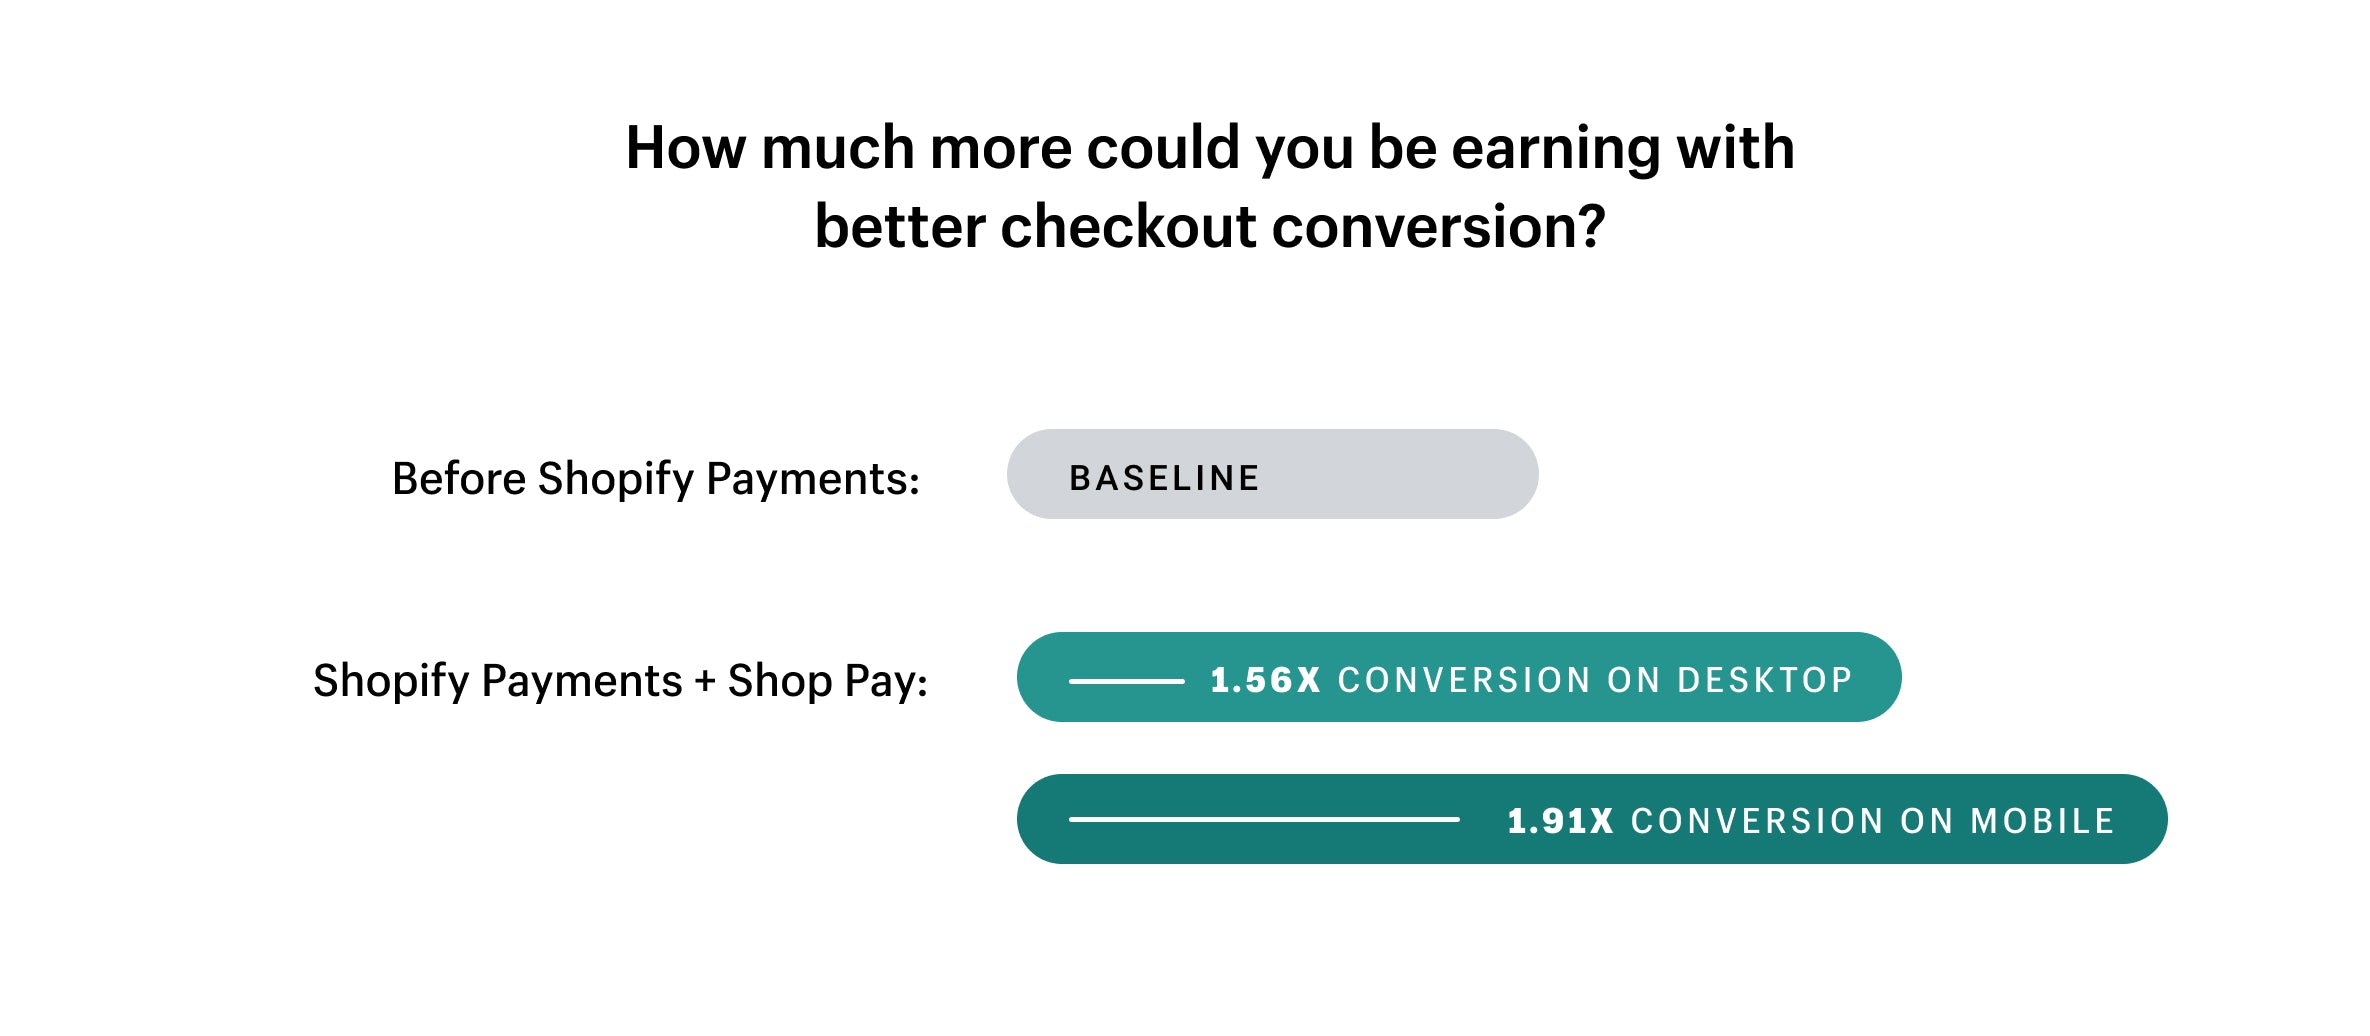 Conversion rates for Shopify Payments.